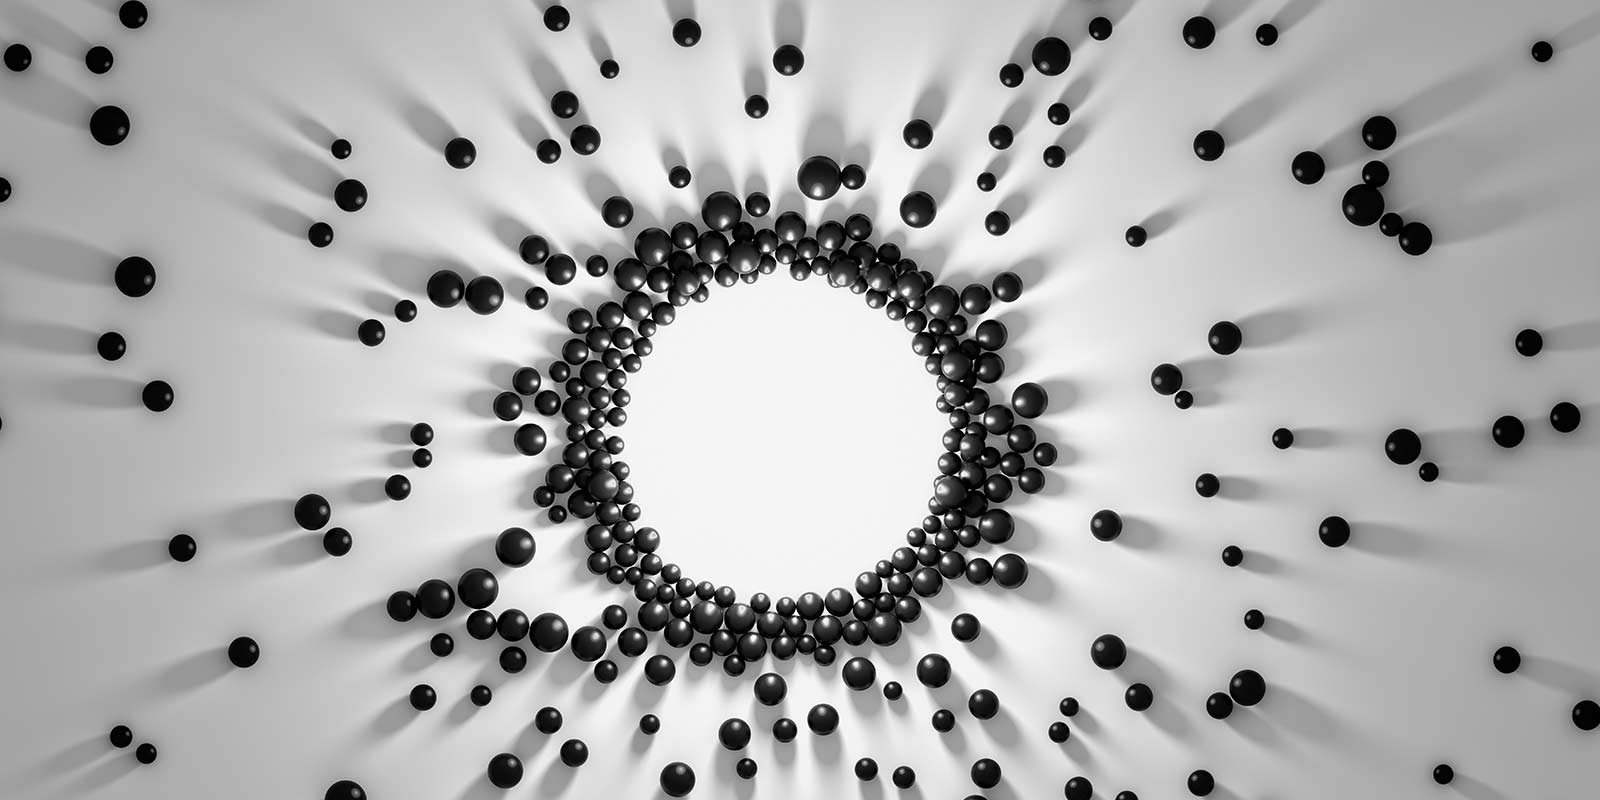 An abstract photo composed of small, spherical pellets arranged in a 2D circle against a white background.